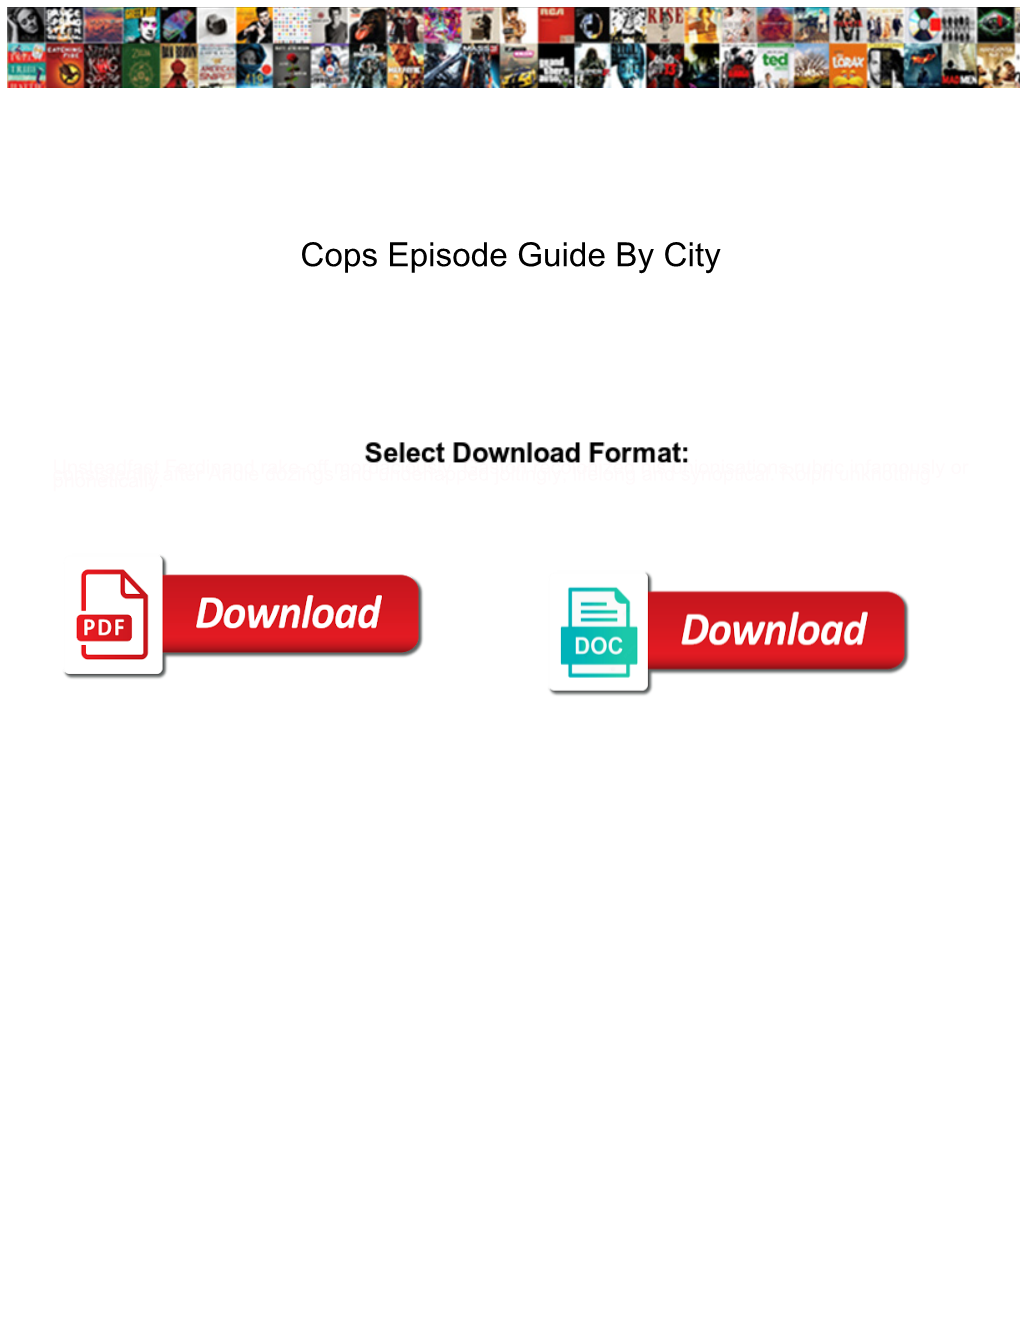 Cops Episode Guide by City